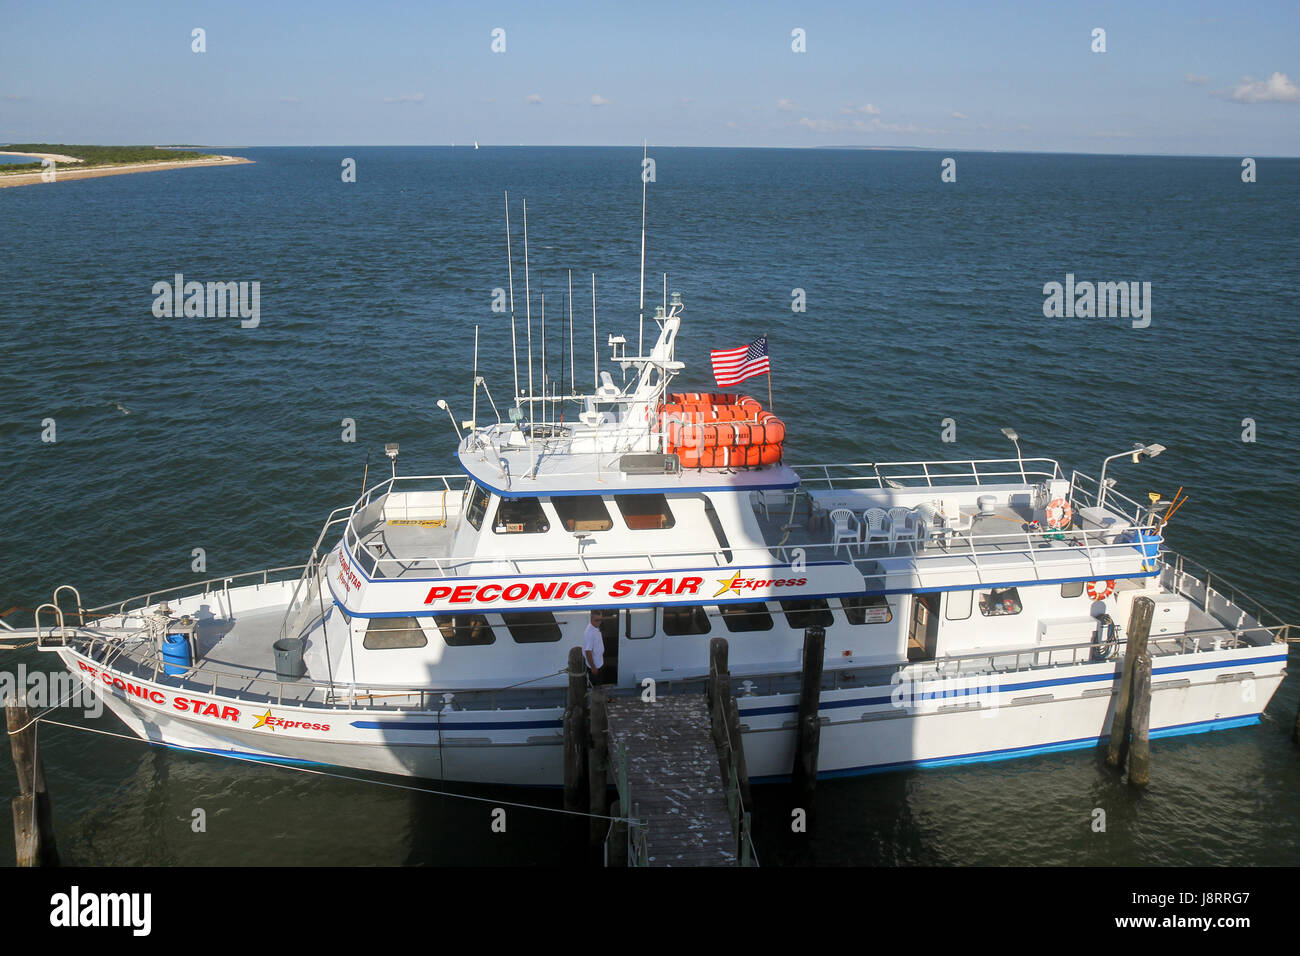 The Peconic Star Express, which brings passengers from the East End Seaport Museum in Greenport to Longbeach Bar Lighthouse. Long Island, New York. Stock Photo